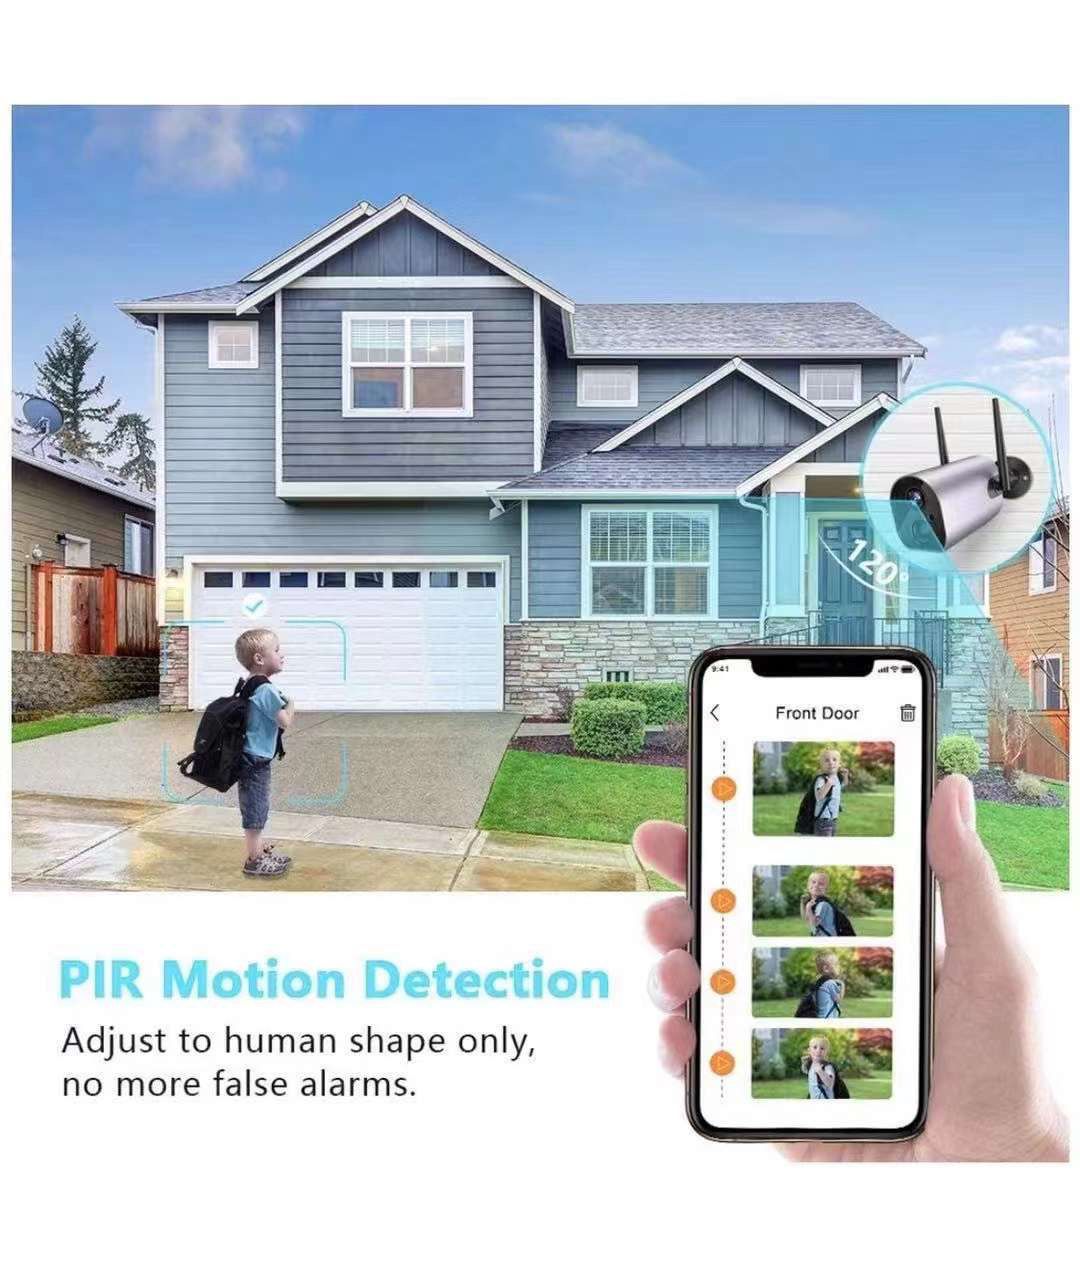 Wireless Security Camera Outdoor, Solar Powered Surveillance Camera, 1080P Outdoor WiFi Security Camera, Night Vision, Two Way Audio, PIR Motion Detec